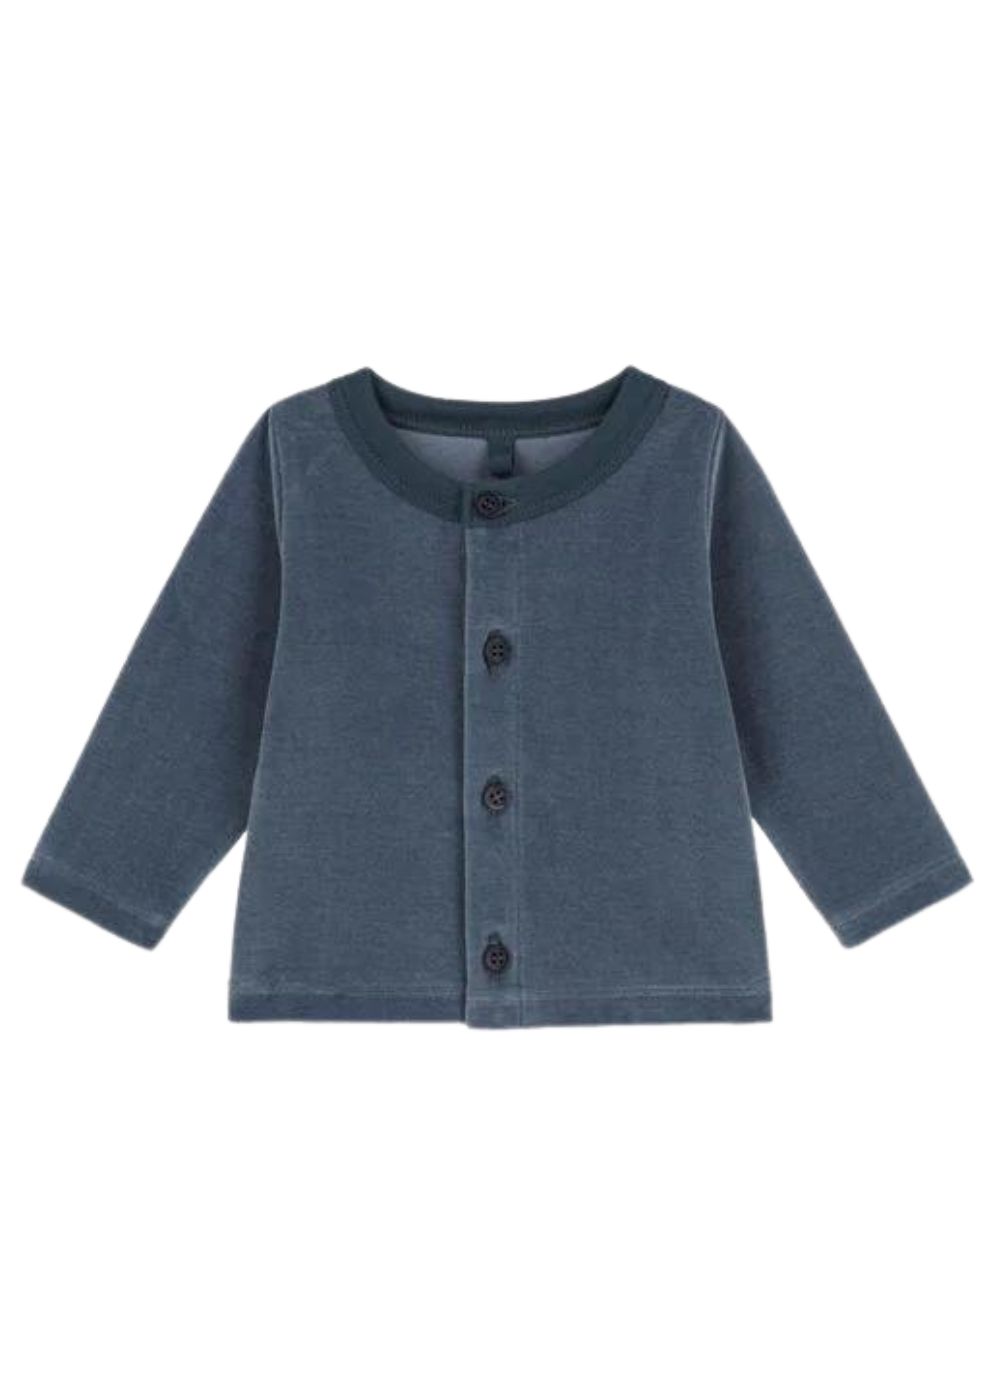 Featured image for “Petit Bateau Cardigan in velluto”